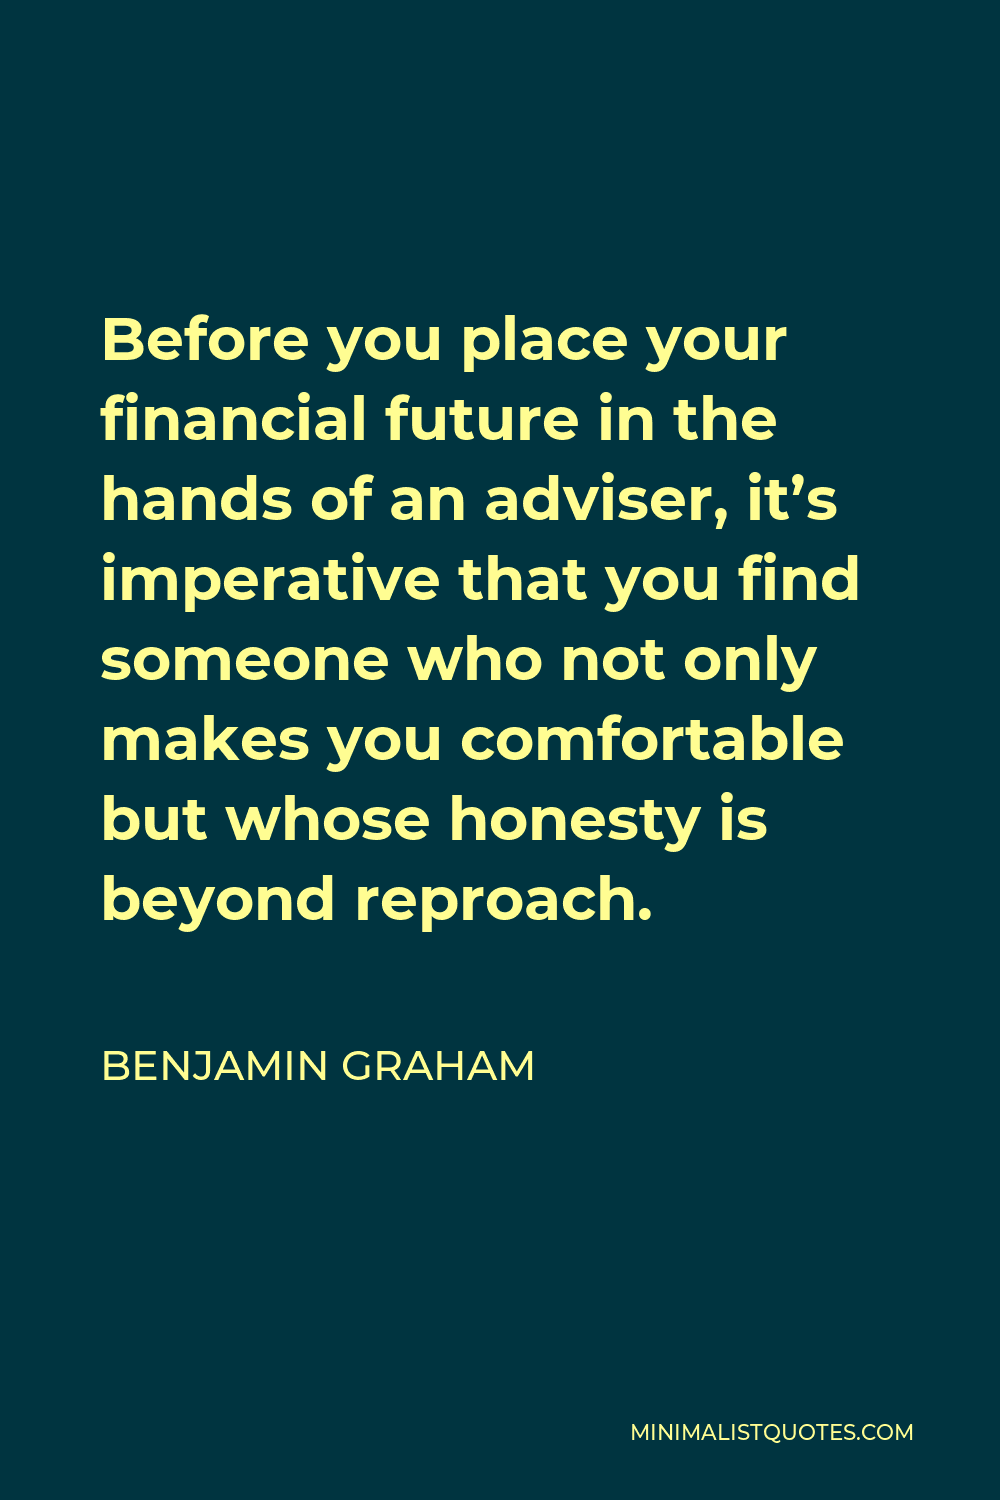 Benjamin Graham Quote - Before you place your financial future in the hands of an adviser, it’s imperative that you find someone who not only makes you comfortable but whose honesty is beyond reproach.